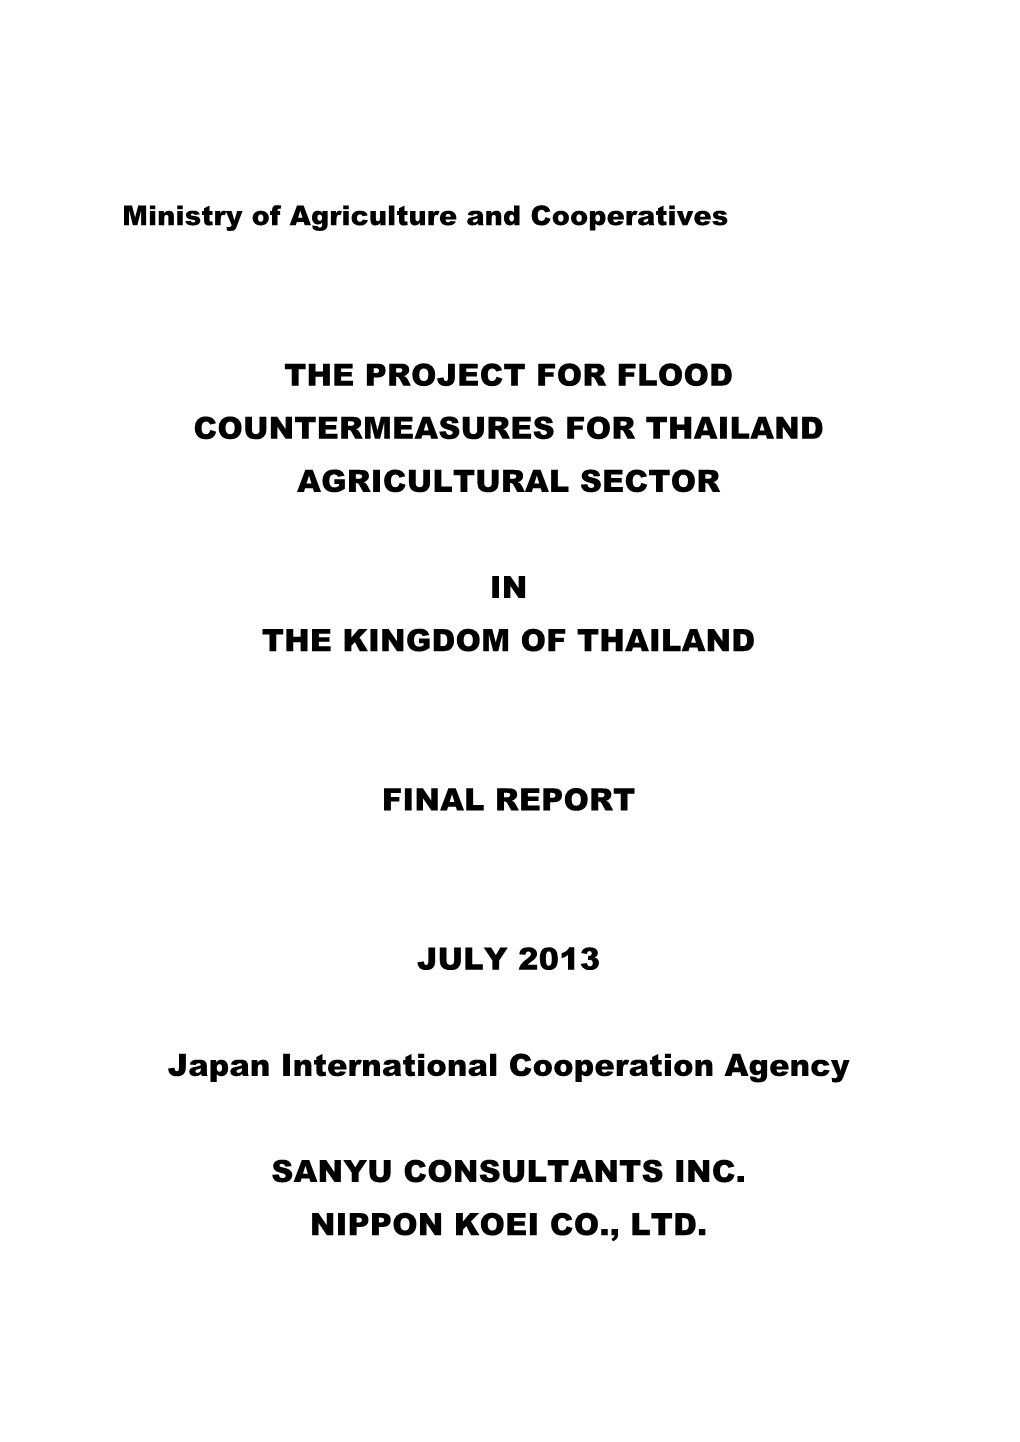 The Project for Flood Countermeasures for Thailand Agricultural Sector